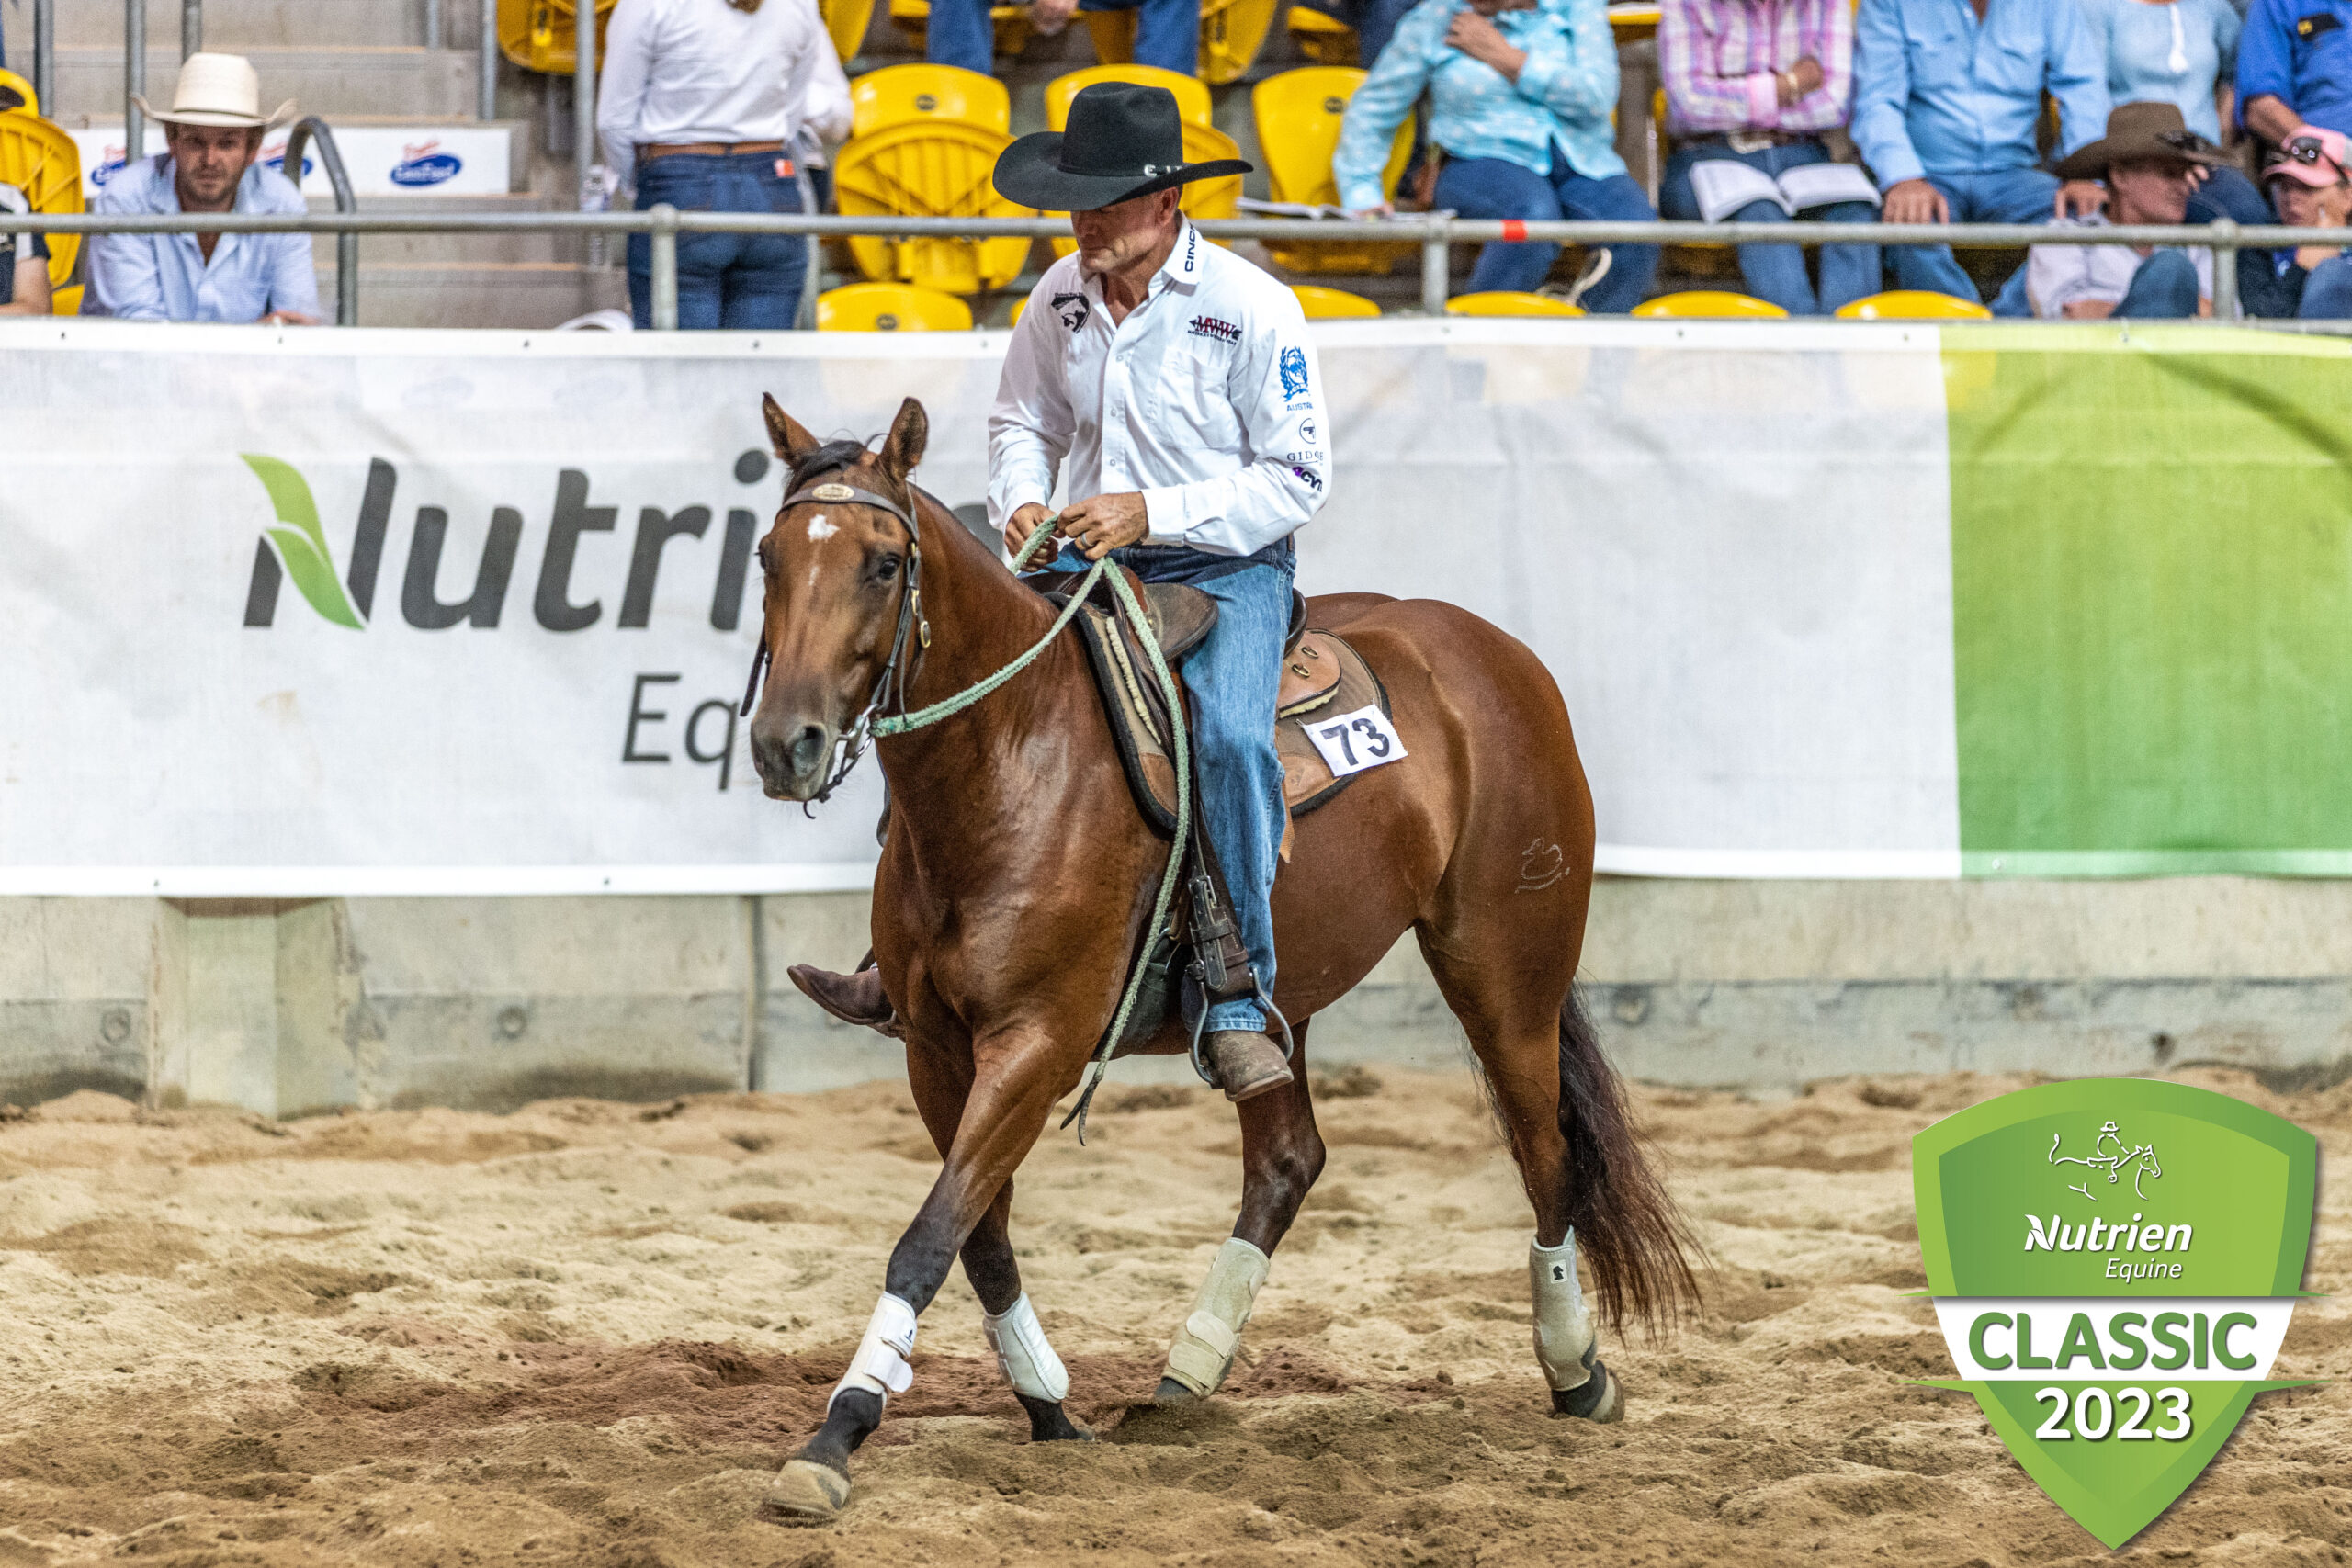 2023 Nutrien Equine Classic has an explosive start with a day top of $400,000